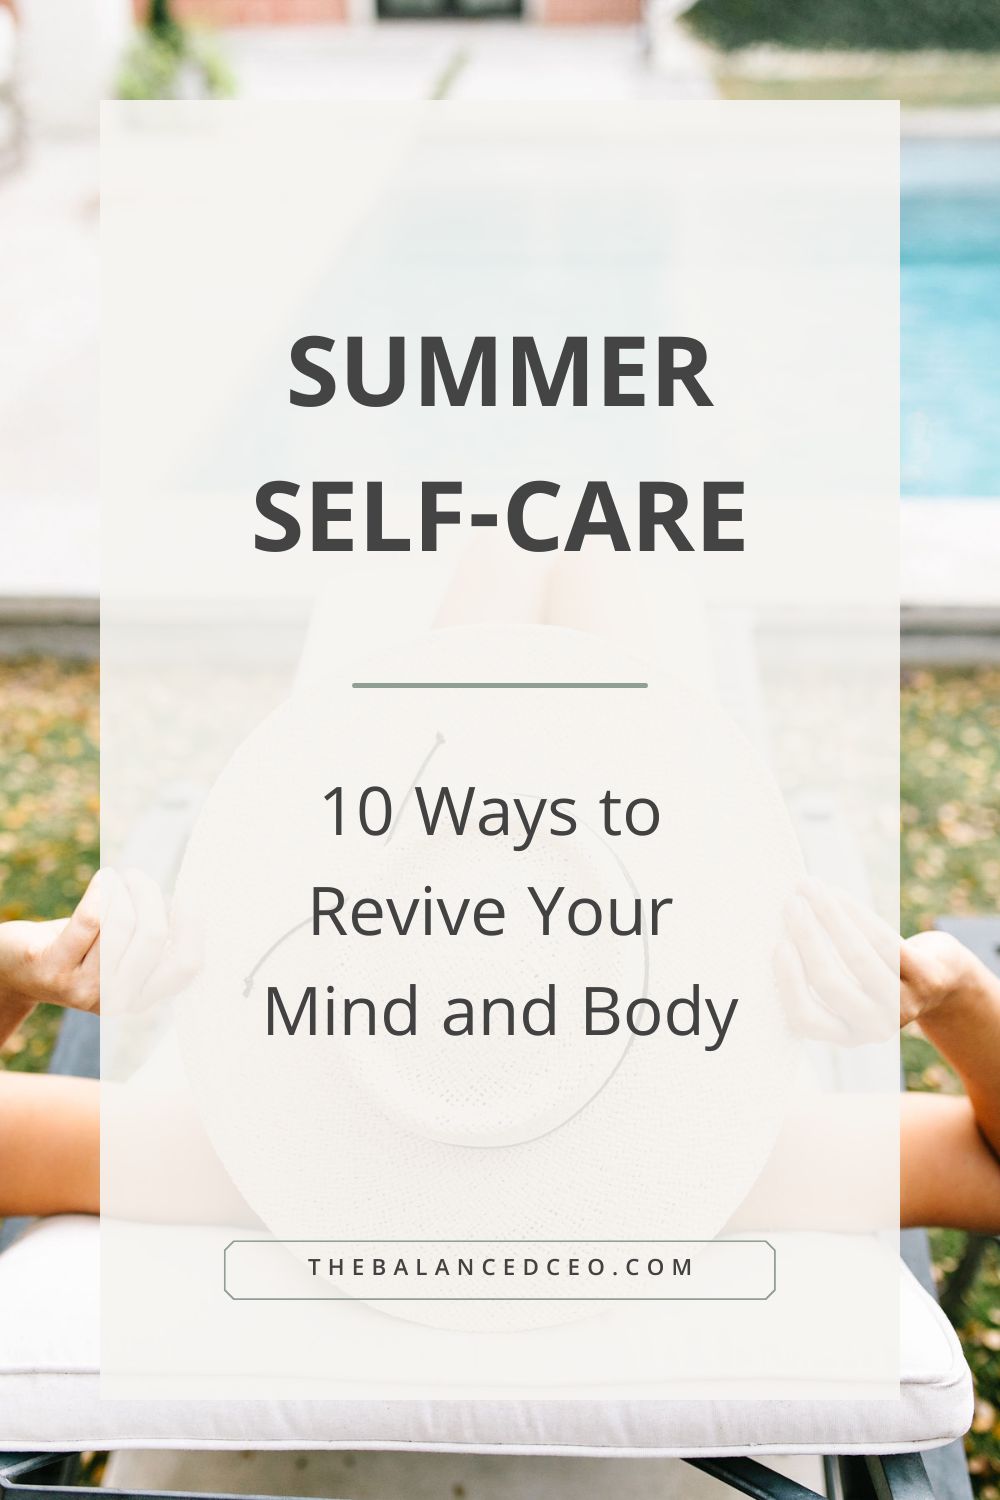 Summer Self-Care: 10 Ways to Revive Your Mind and Body